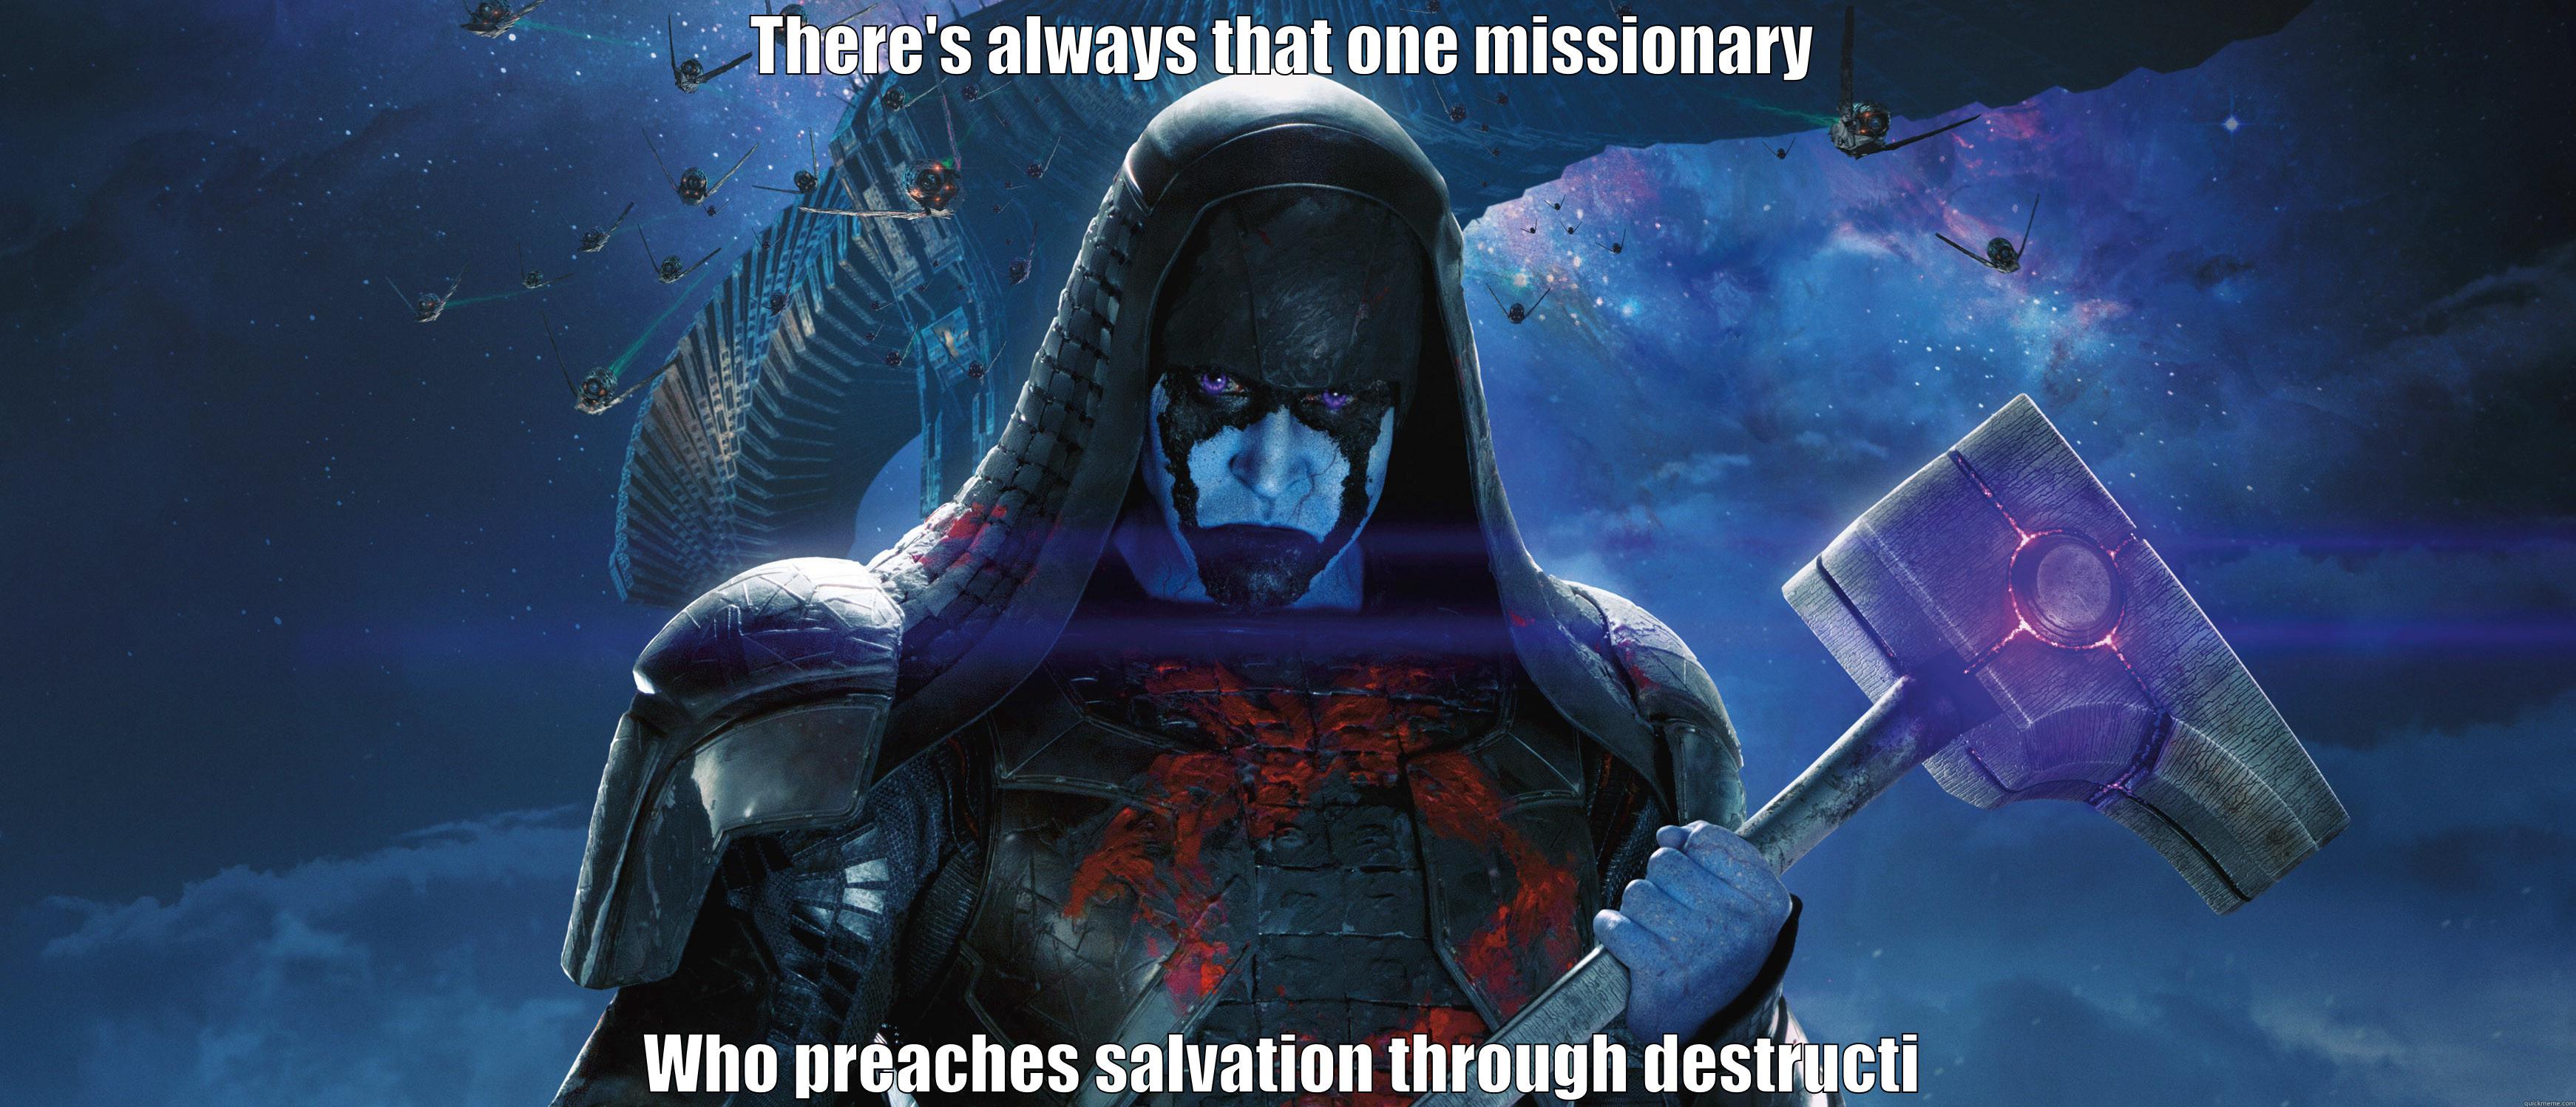 THERE'S ALWAYS THAT ONE MISSIONARY WHO PREACHES SALVATION THROUGH DESTRUCTION Misc